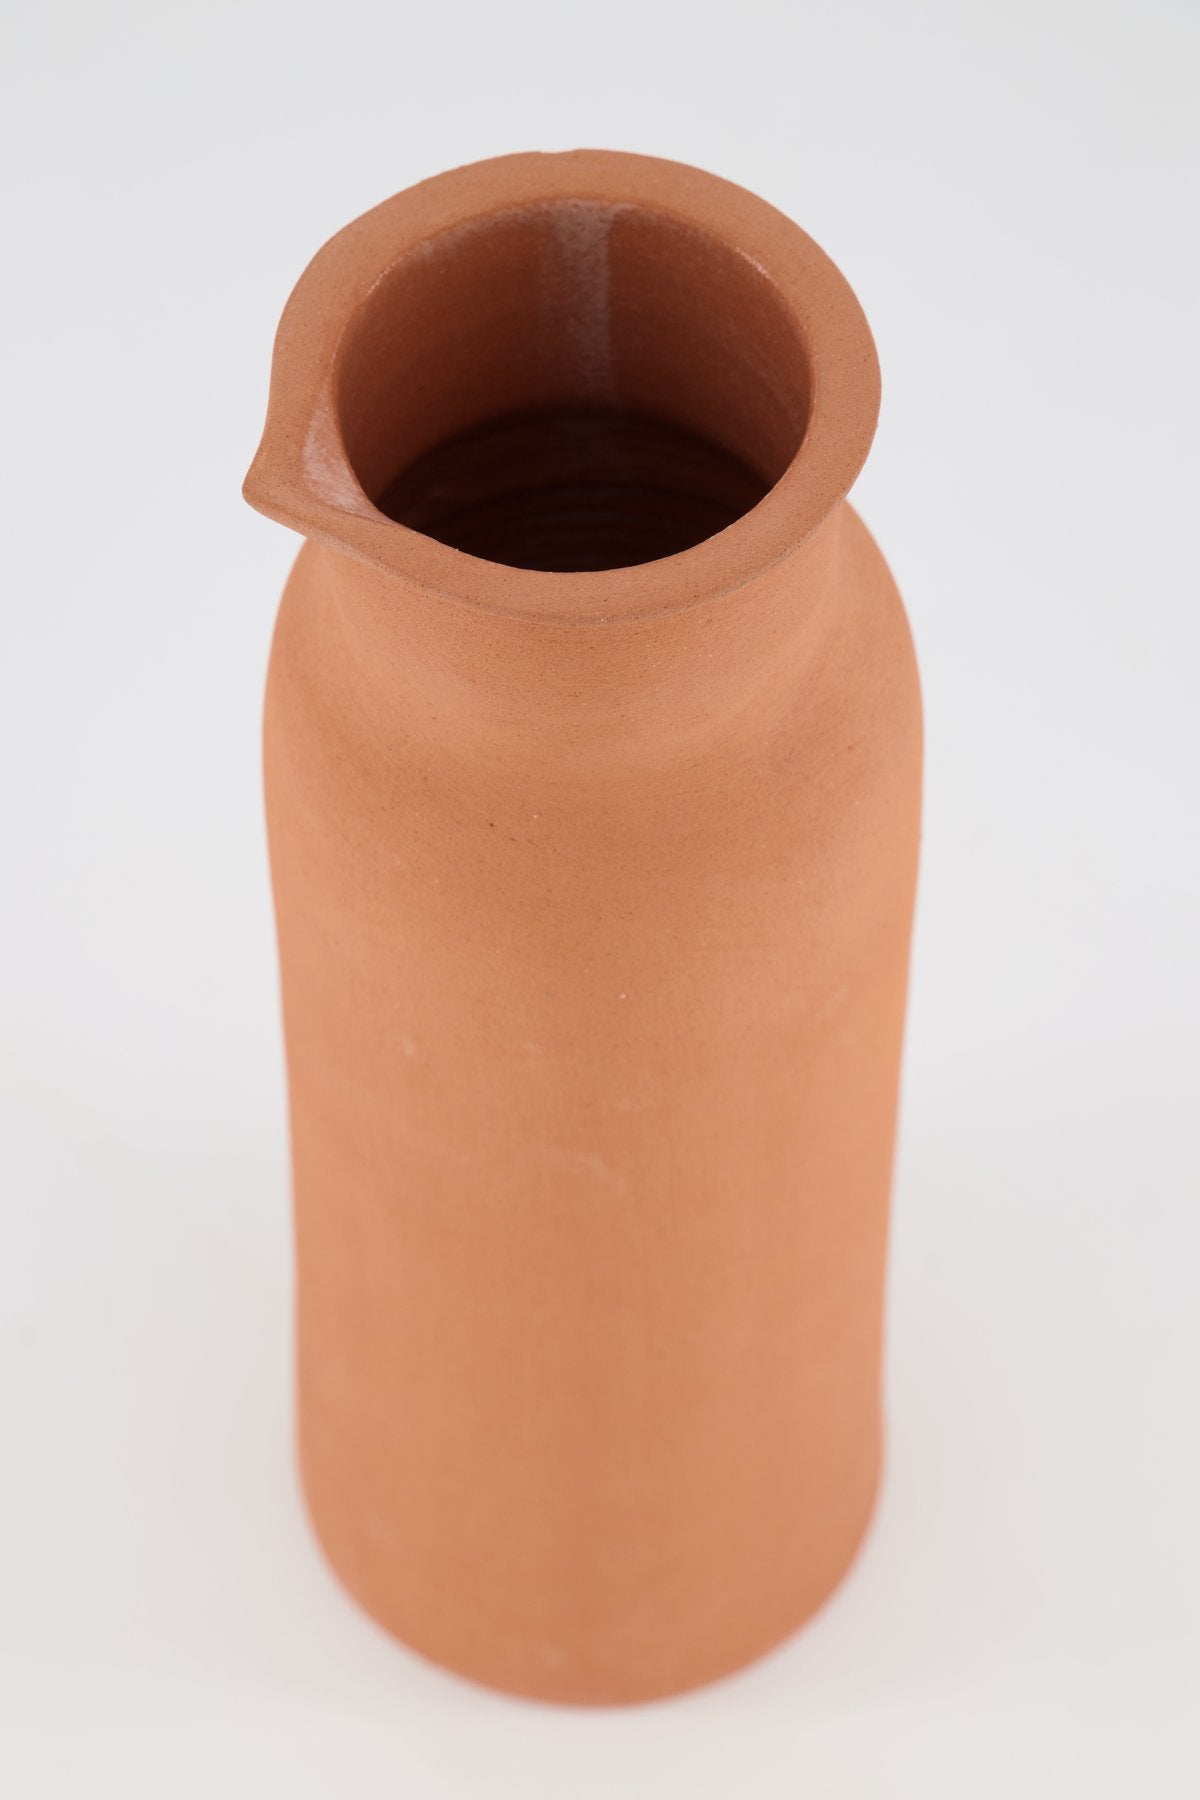 Clay Water Pitcher - Terracotta